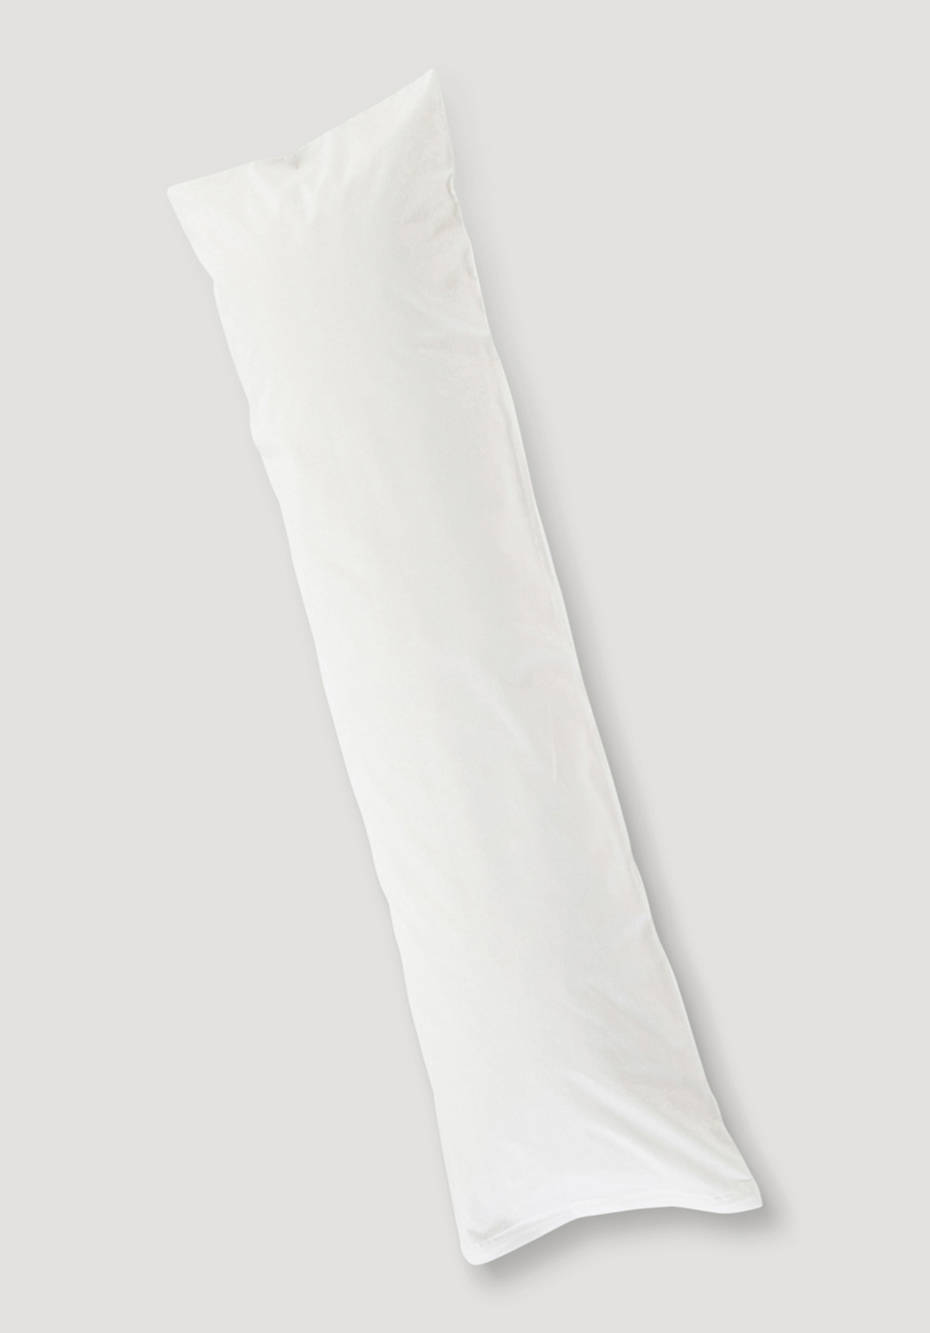 Renforcé side sleeper pillowcase made from pure organic cotton